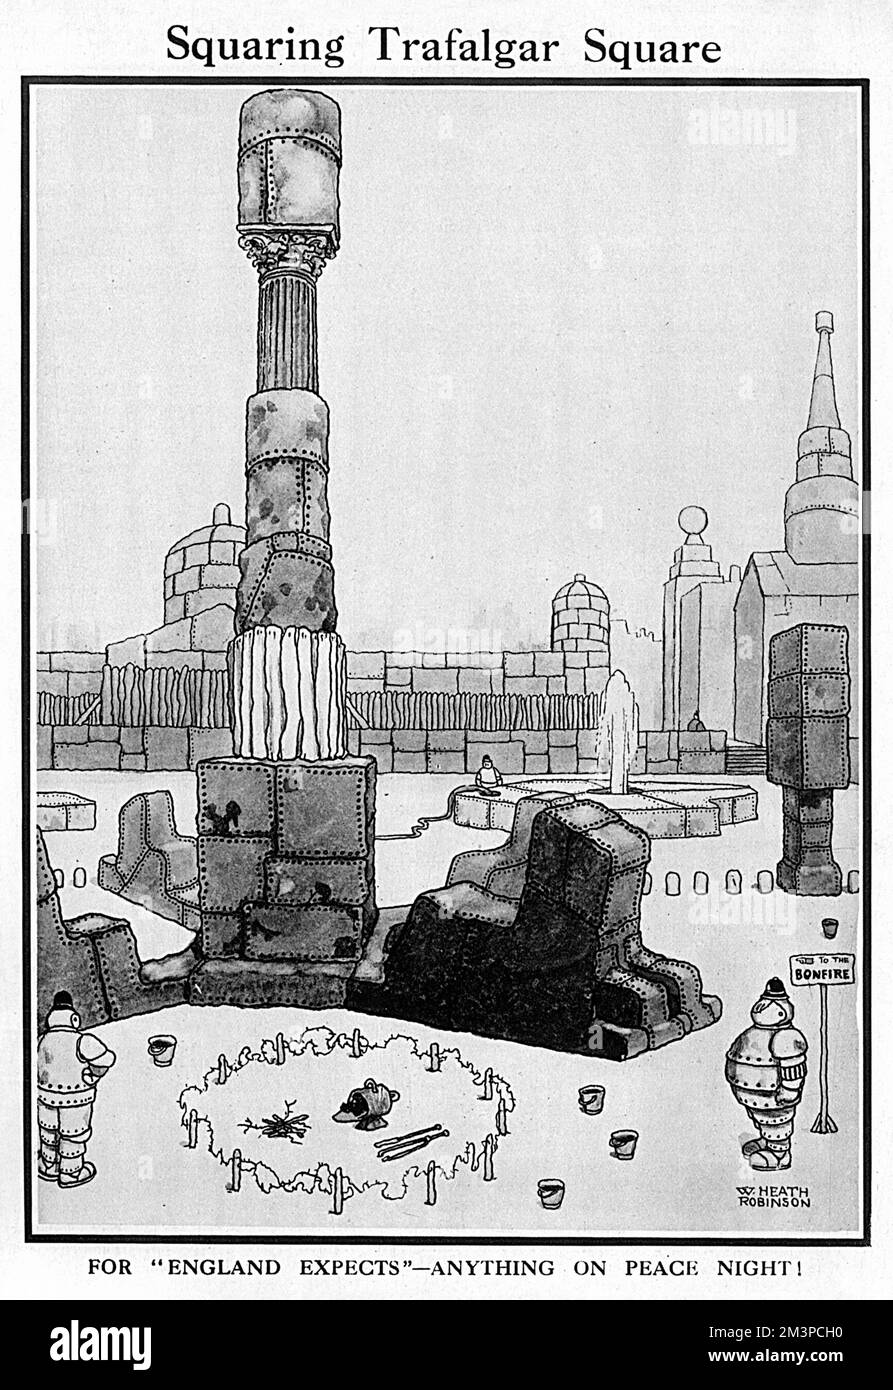 'For &quot;England Expects&quot; - Anything on Peace Night.'  Trafalgar Square in the heart of London with all its monuments - Nelson's Column, Landseer's lions and the National Gallery - all armoured against rowdy celebrations expected for marking peace in Europe at the end of the First World War.       Date: 1919 Stock Photo